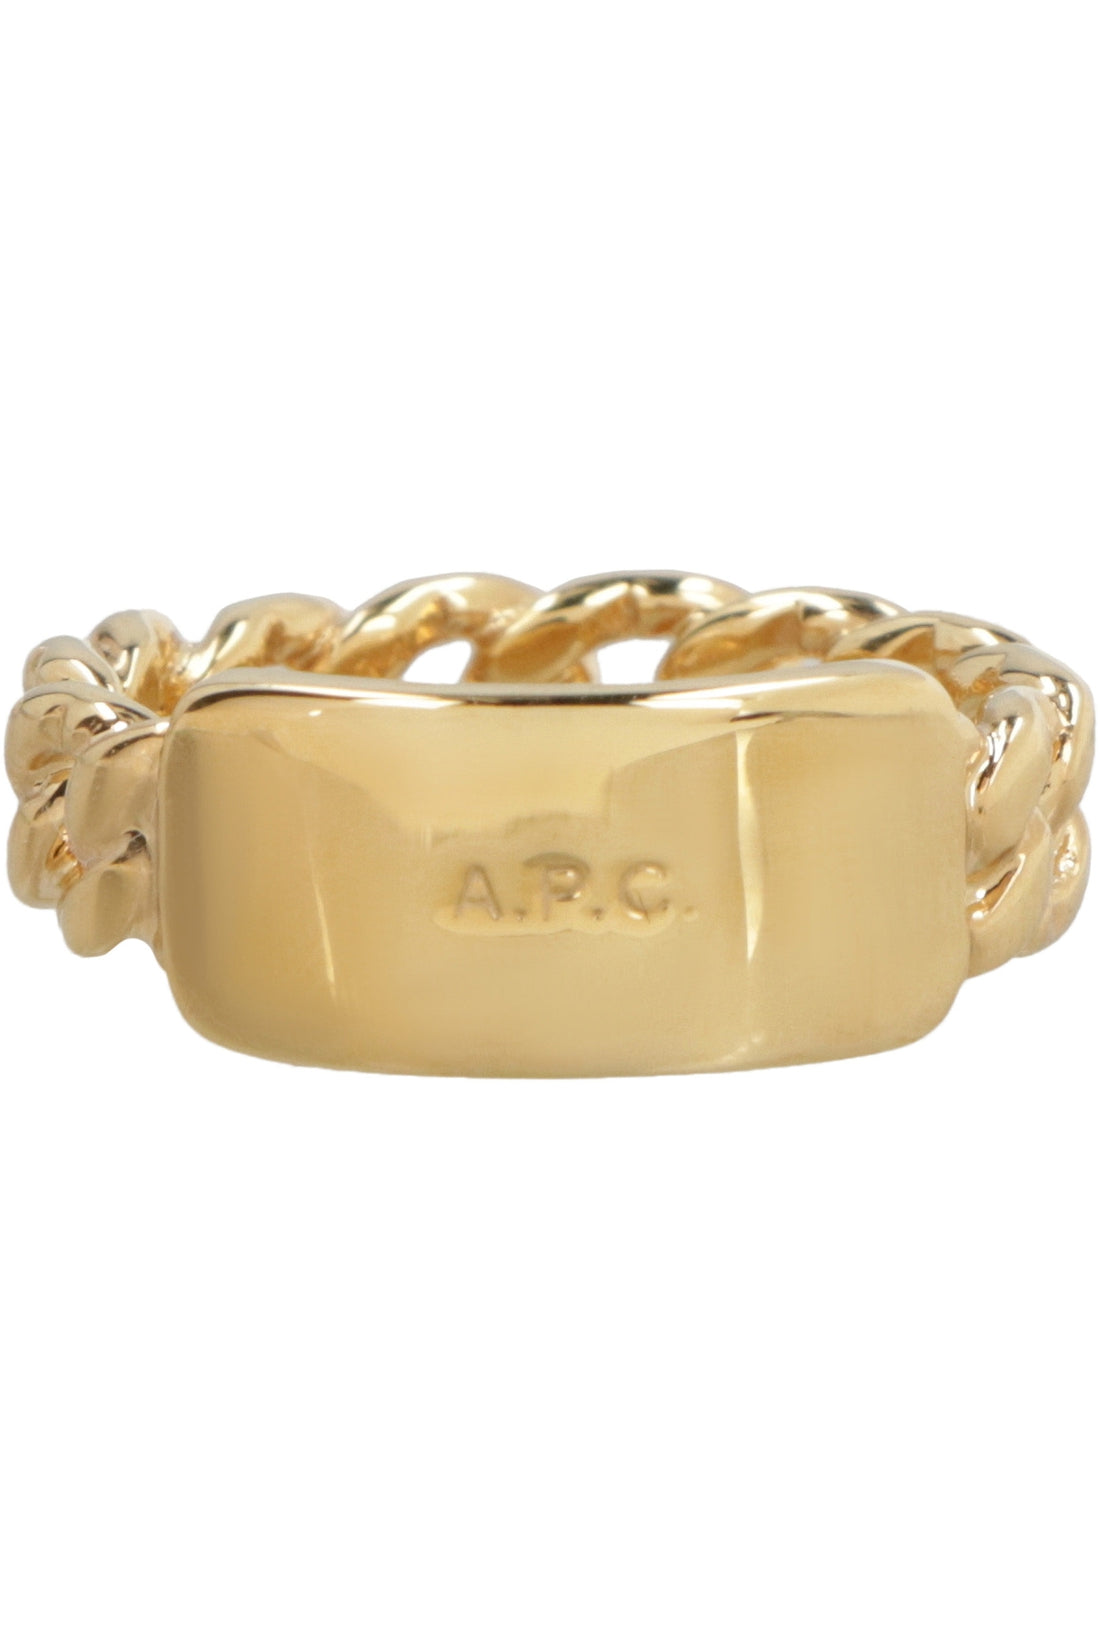 A.P.C.-OUTLET-SALE-Darwin brass ring-ARCHIVIST